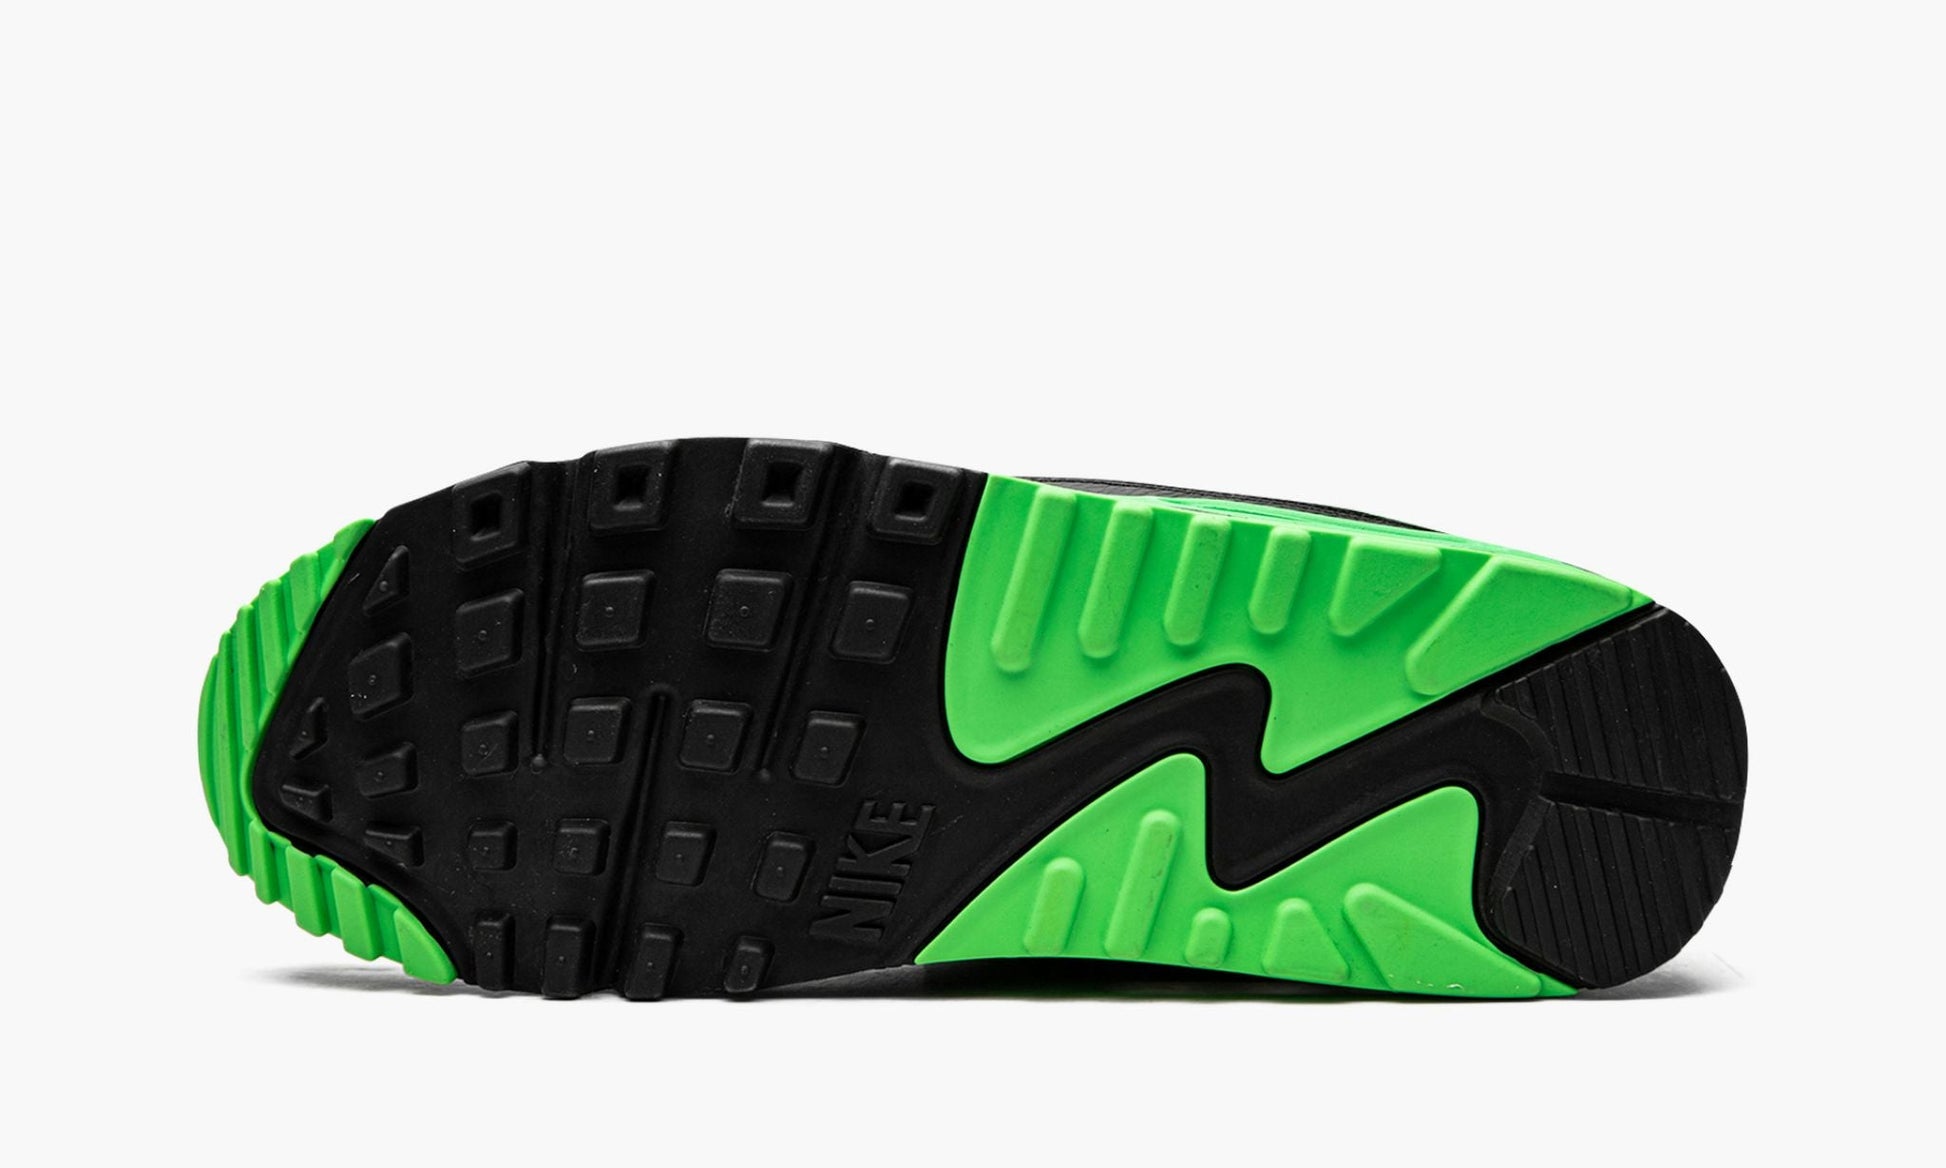 Air Max 90 / UNDFTD "Undefeated Black/Green"